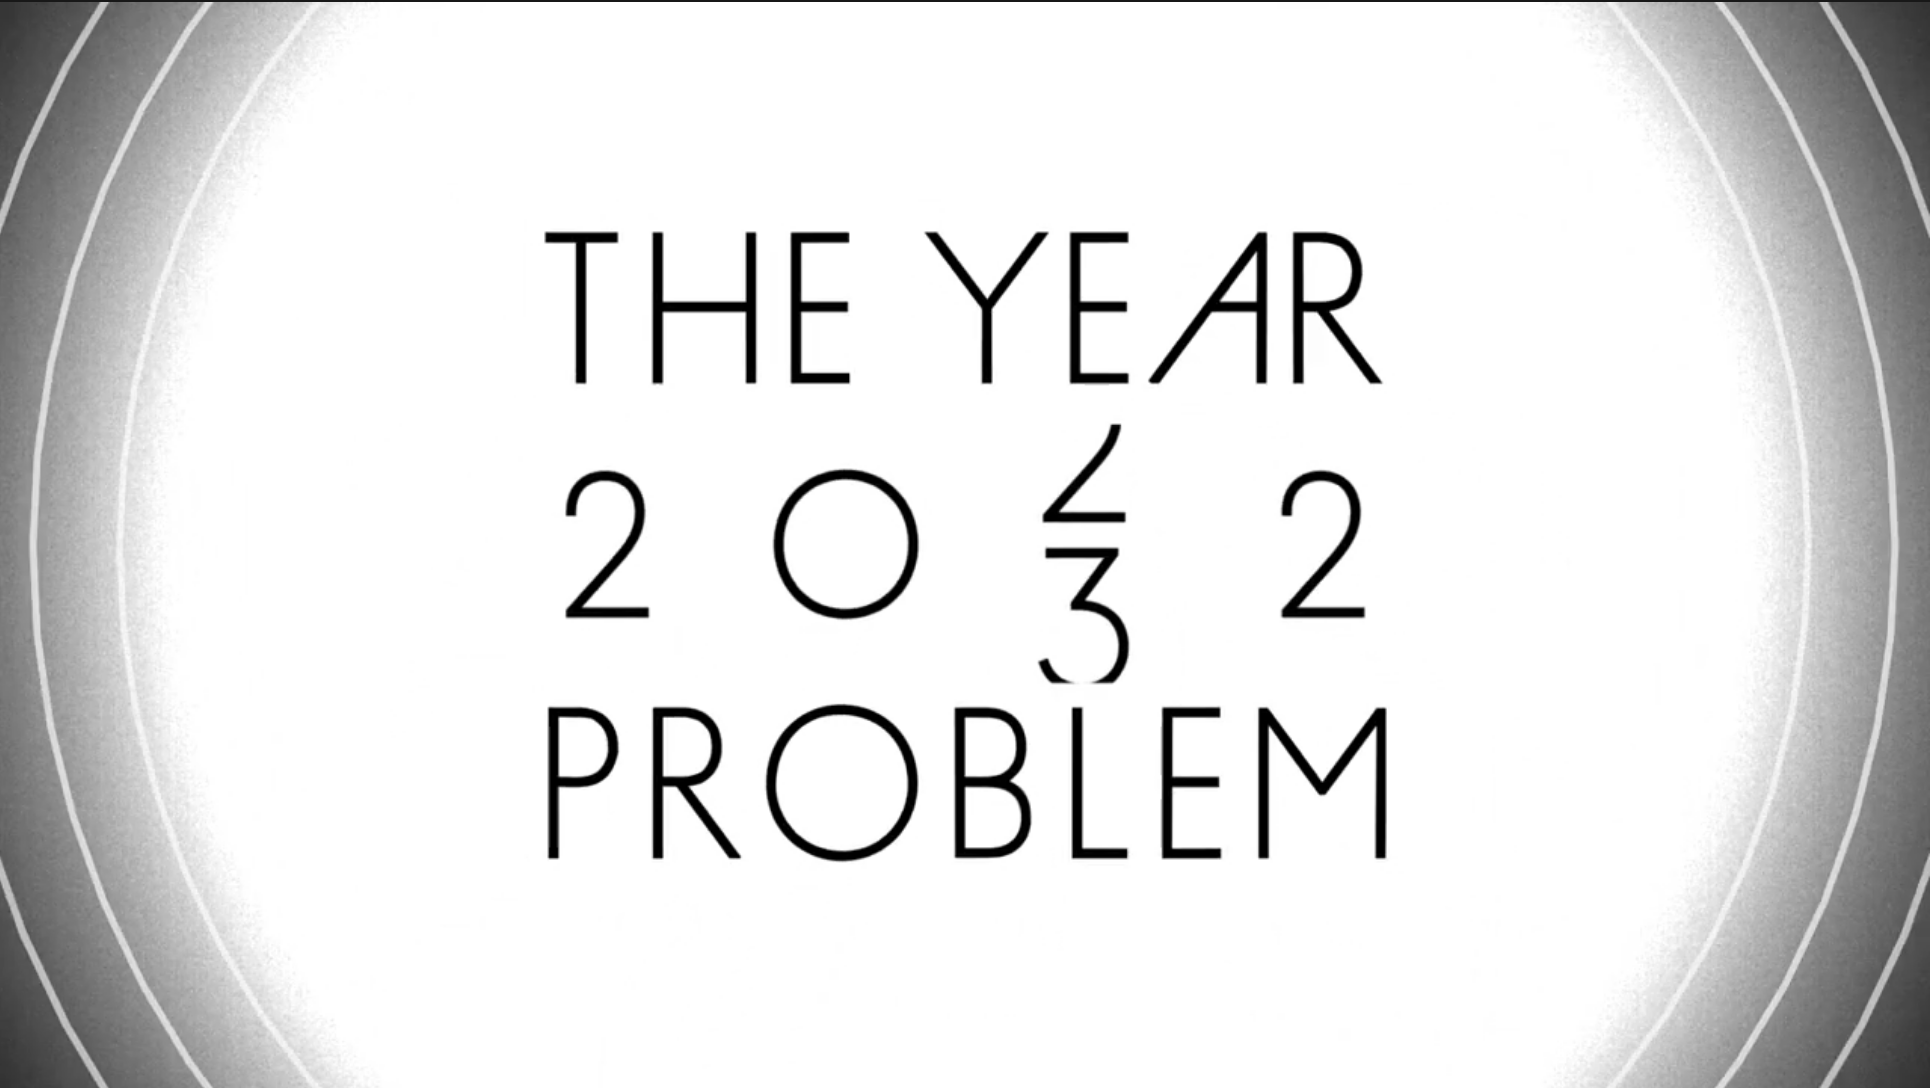 White background with black text that reads 'The Year 2032 Problem'.